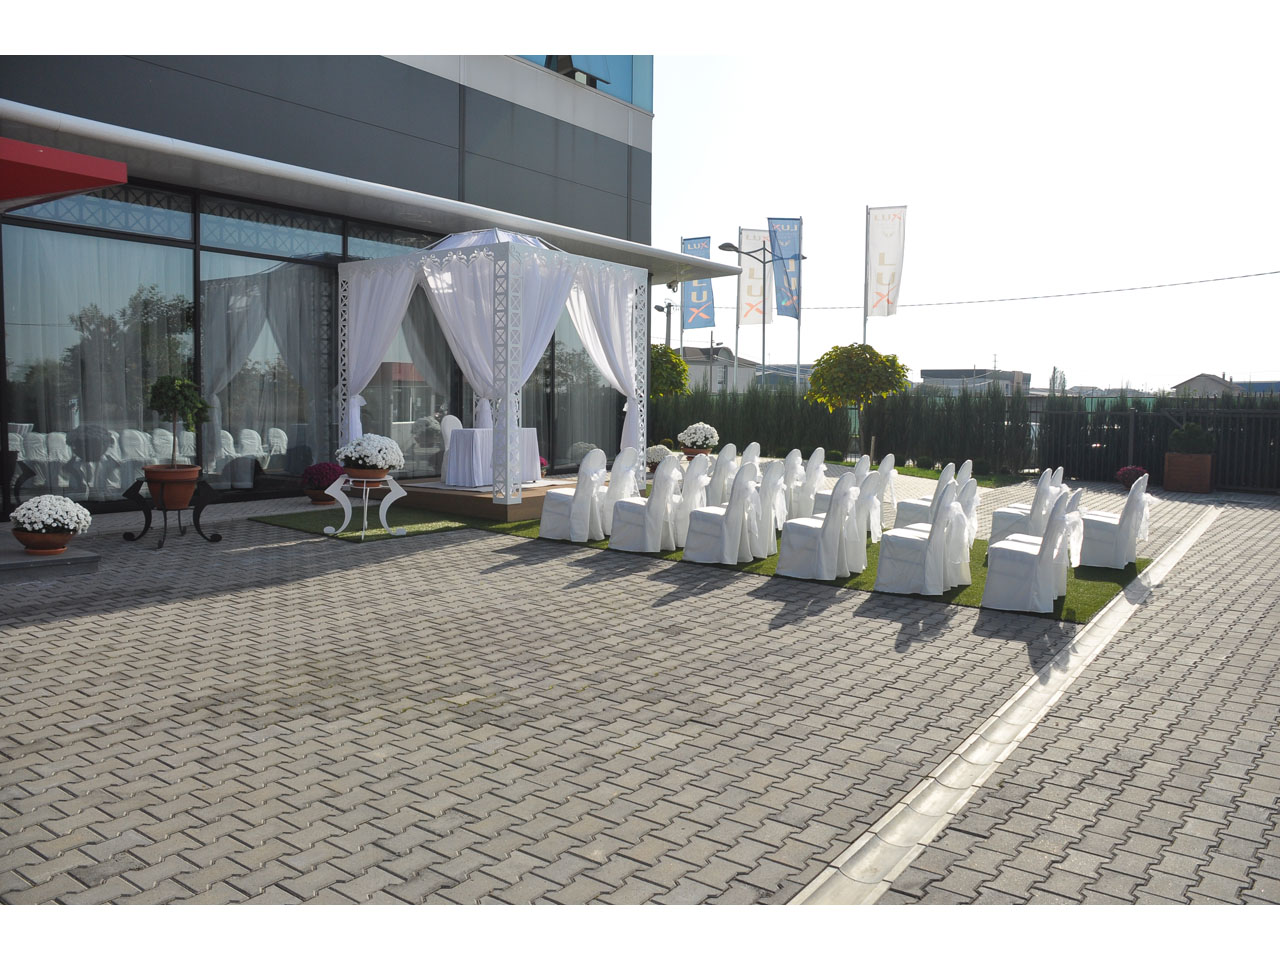 EVENTS CENTER LUX Spaces for celebrations, parties, birthdays Belgrade - Photo 2